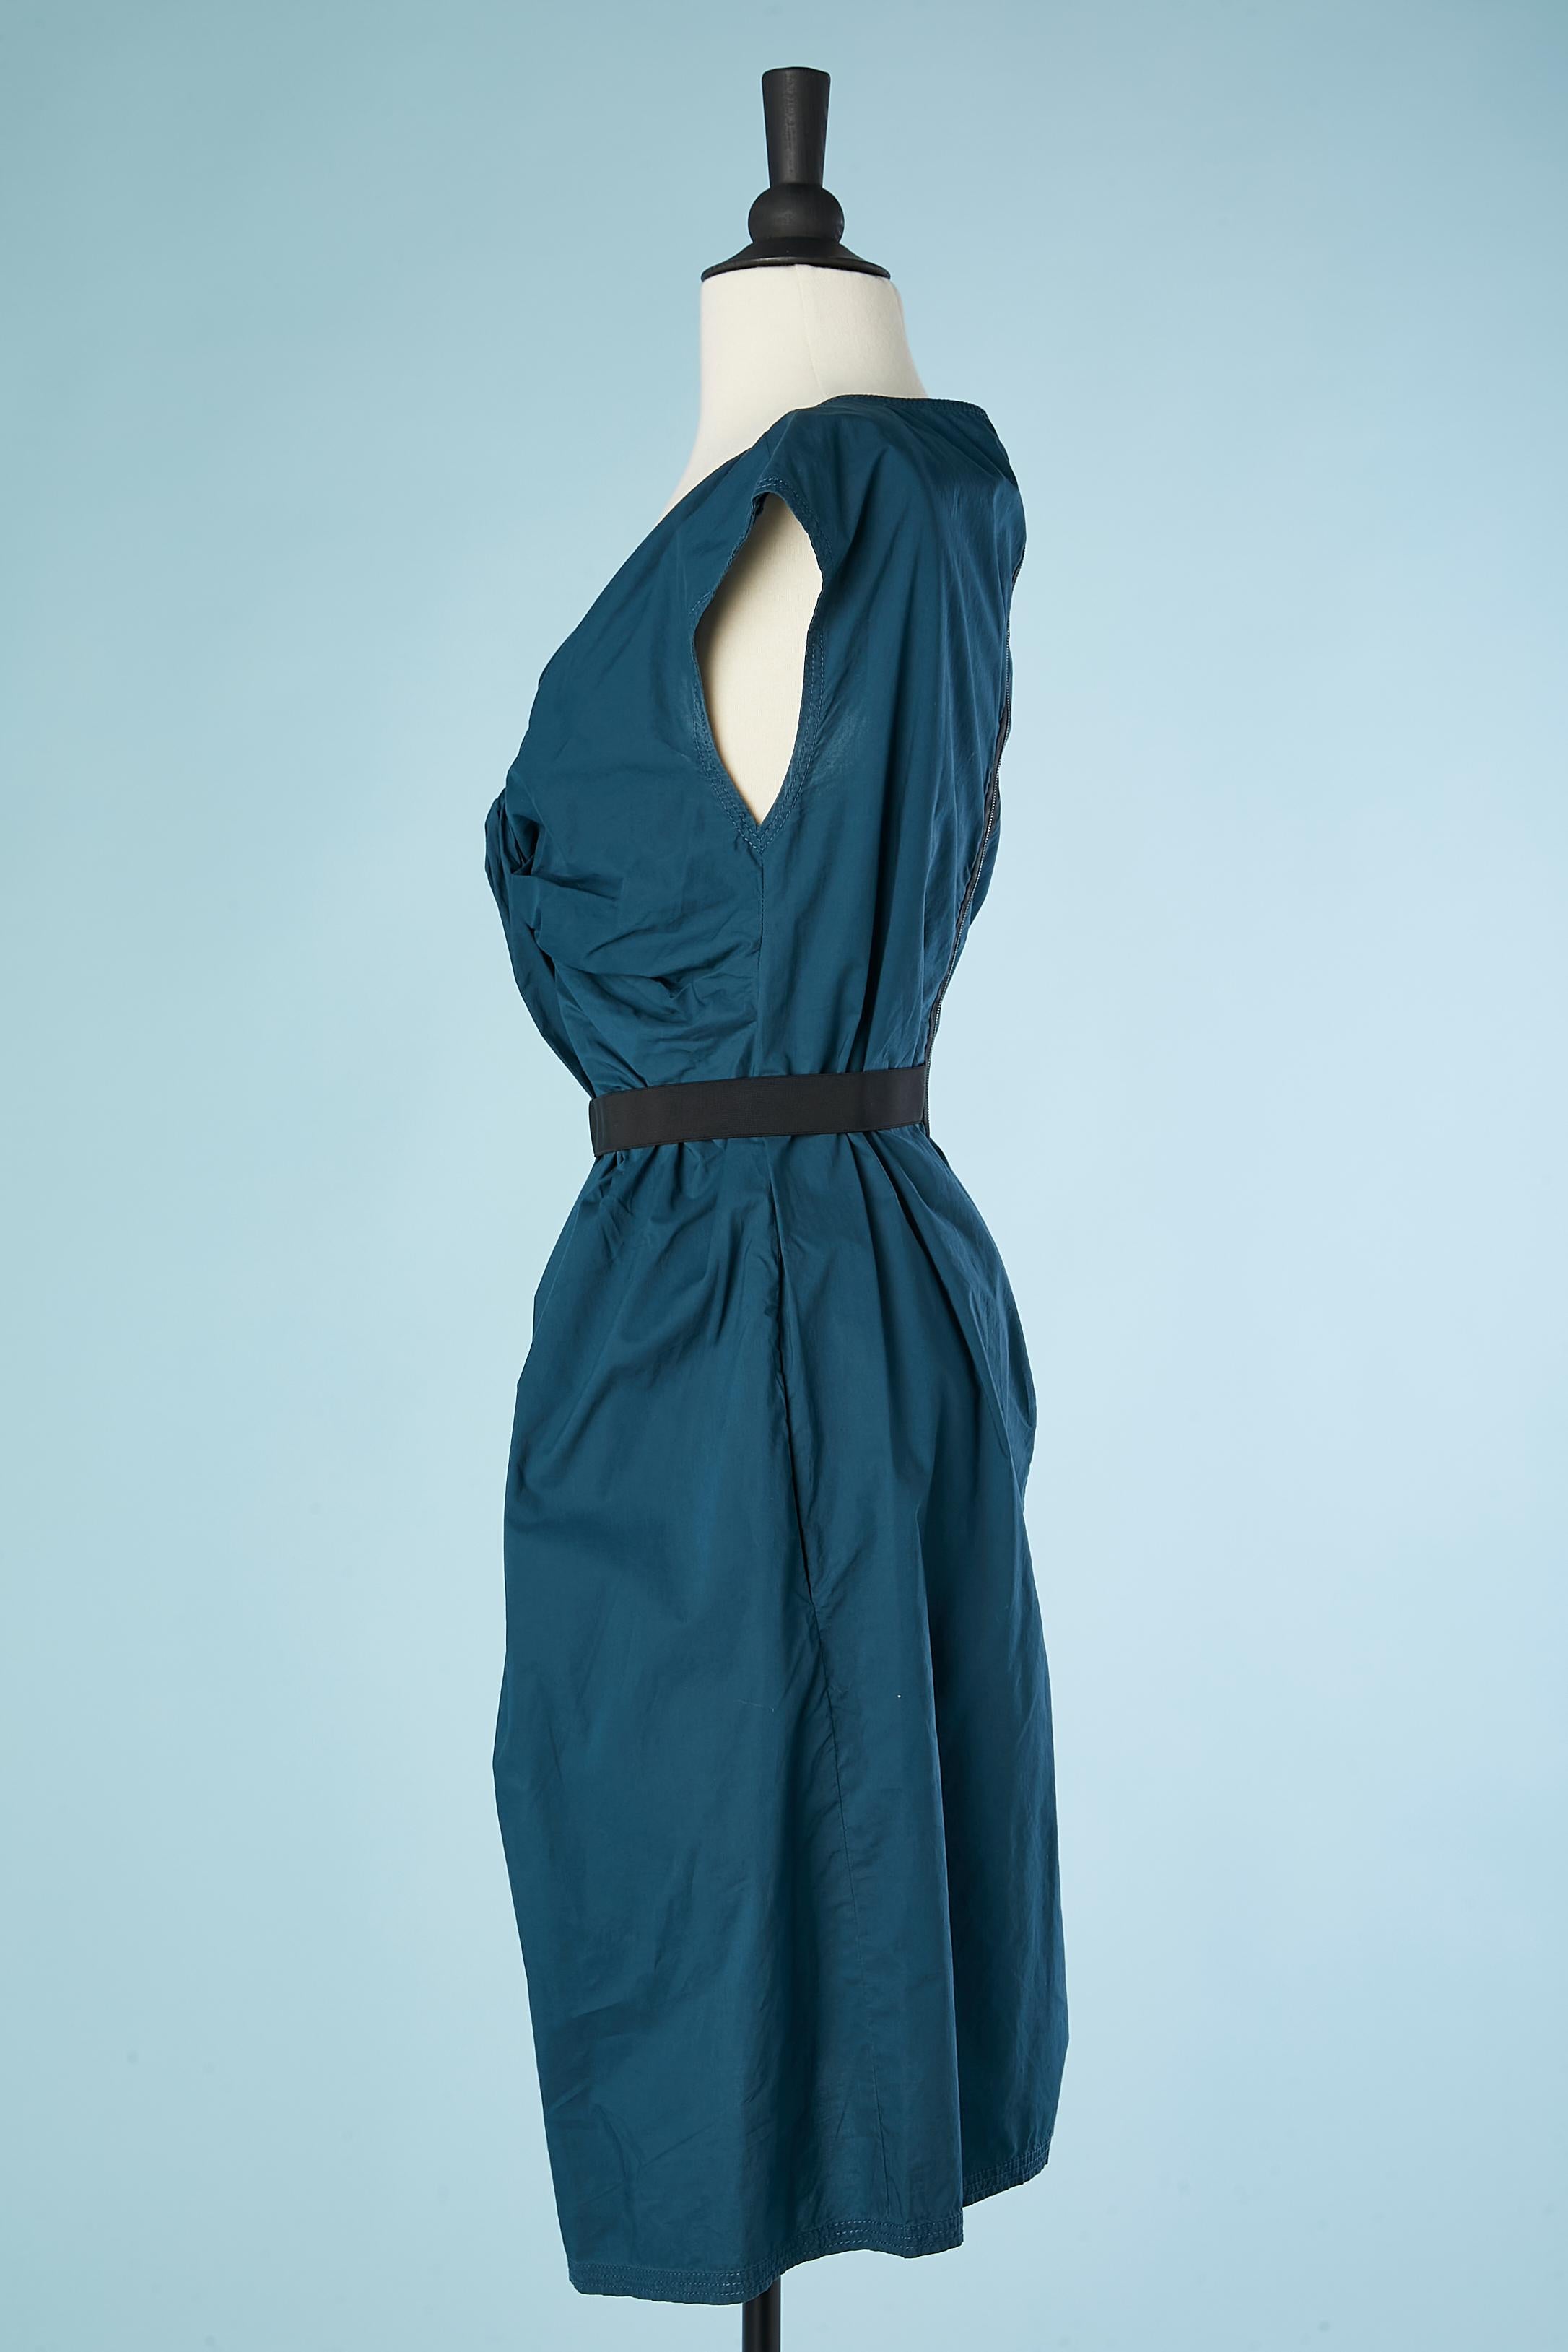 Women's Blue cotton sleeveless dress with drape in the front Lanvin by Alber Elbaz For Sale